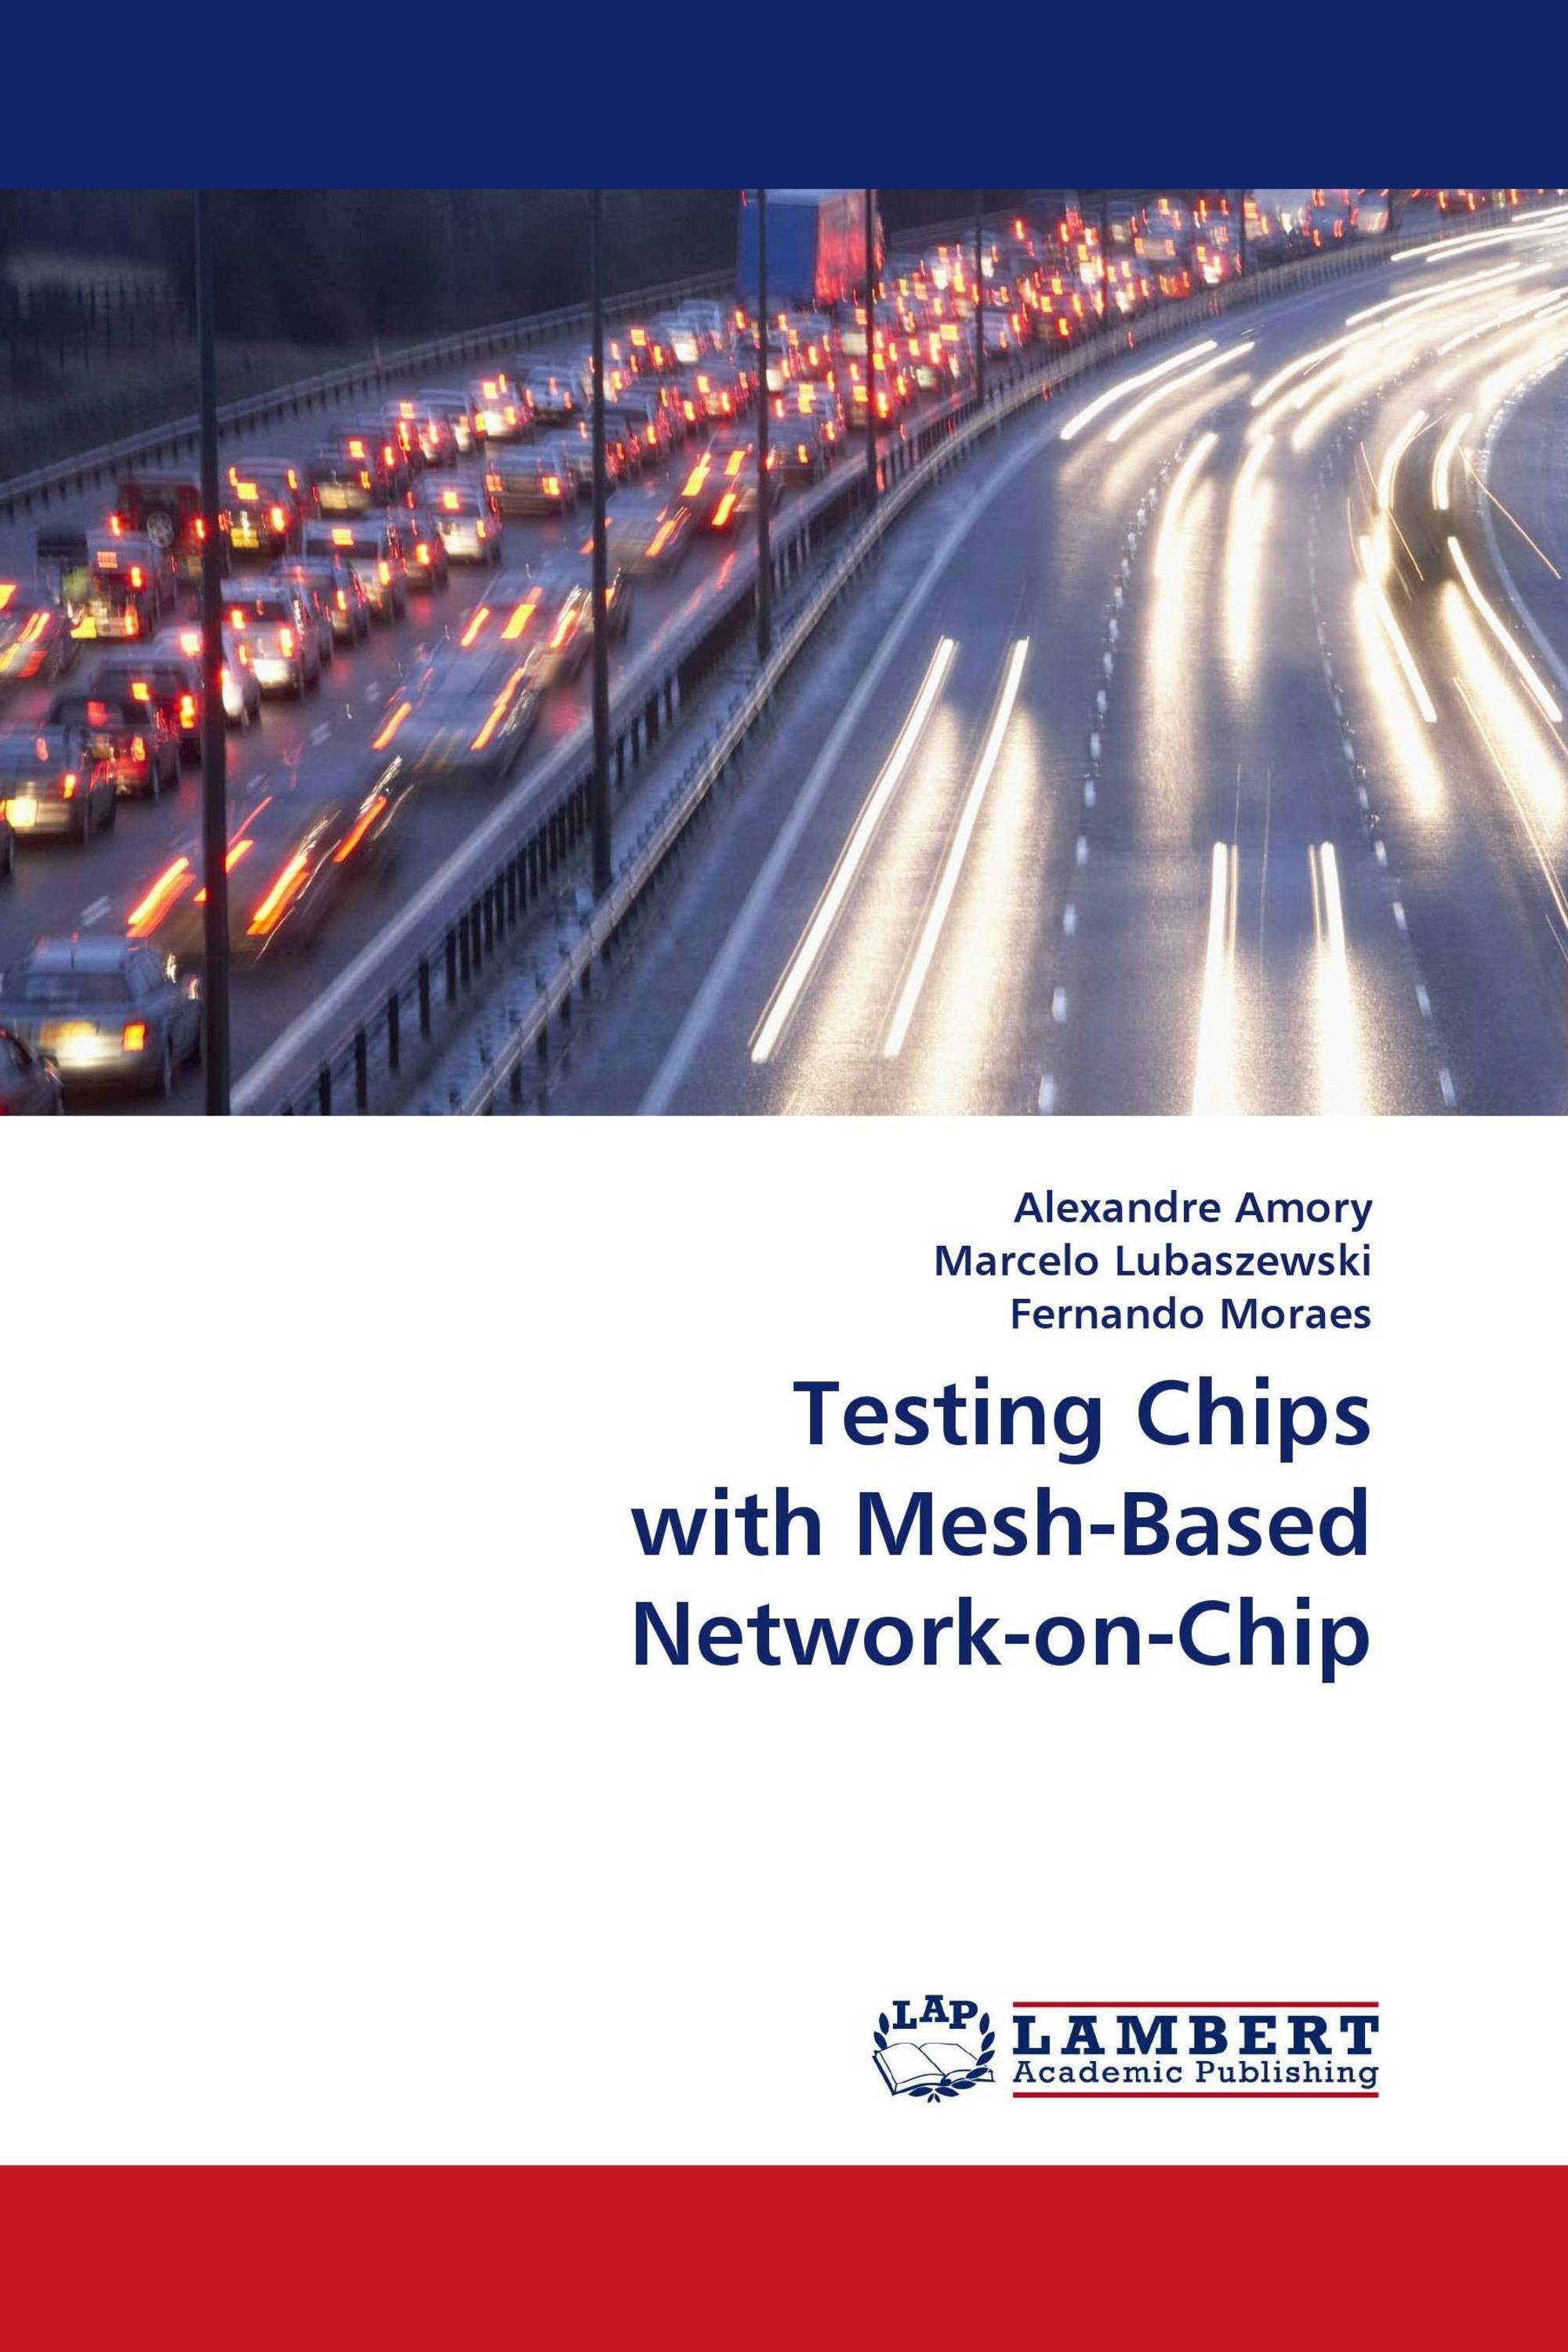 Testing Chips with Mesh-Based Network-on-Chip